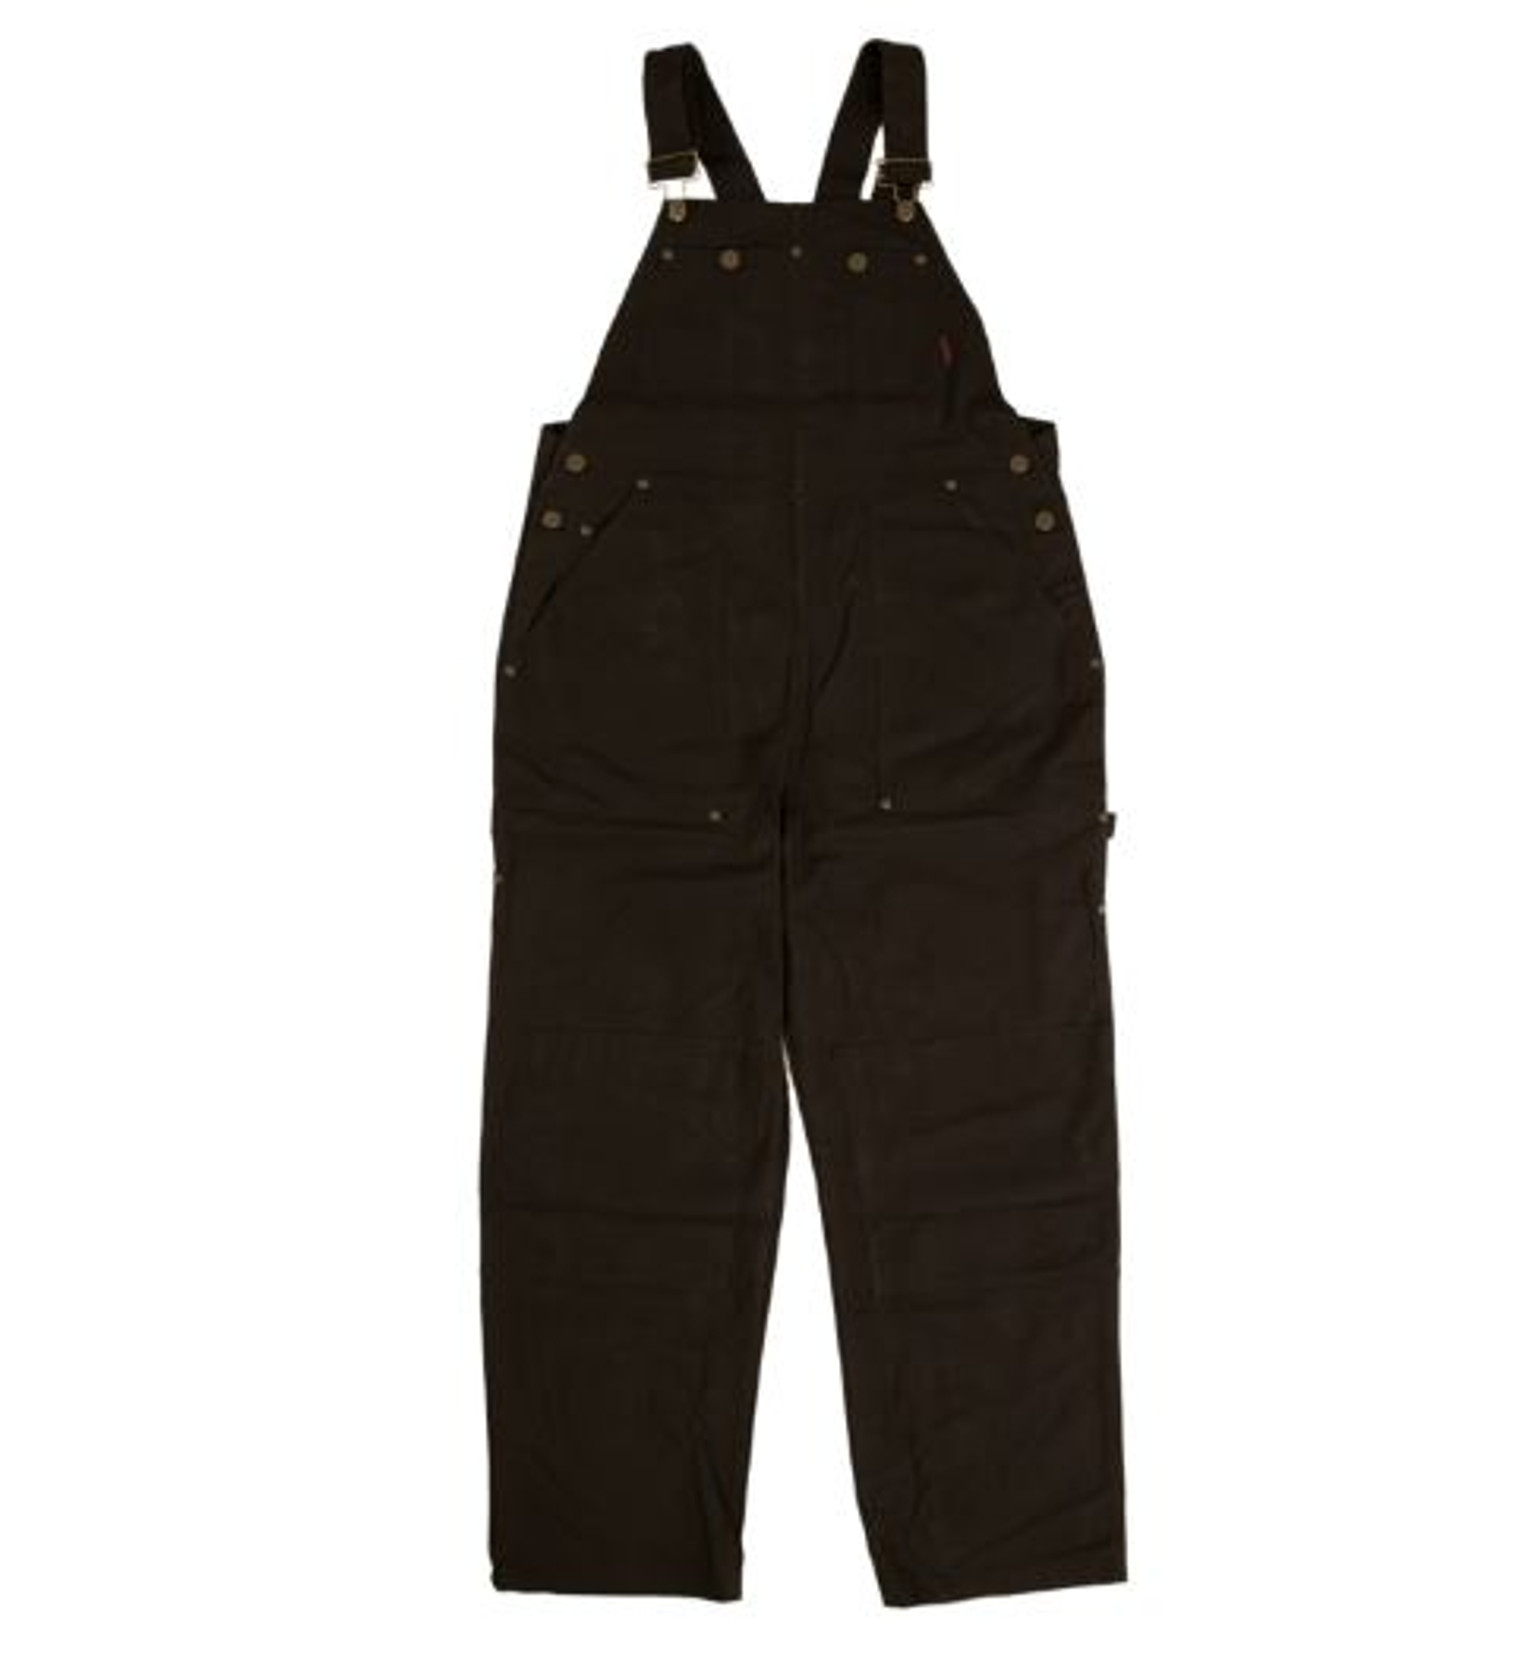 Women’s Unlined Duck Overall (Black) - 2 Pack